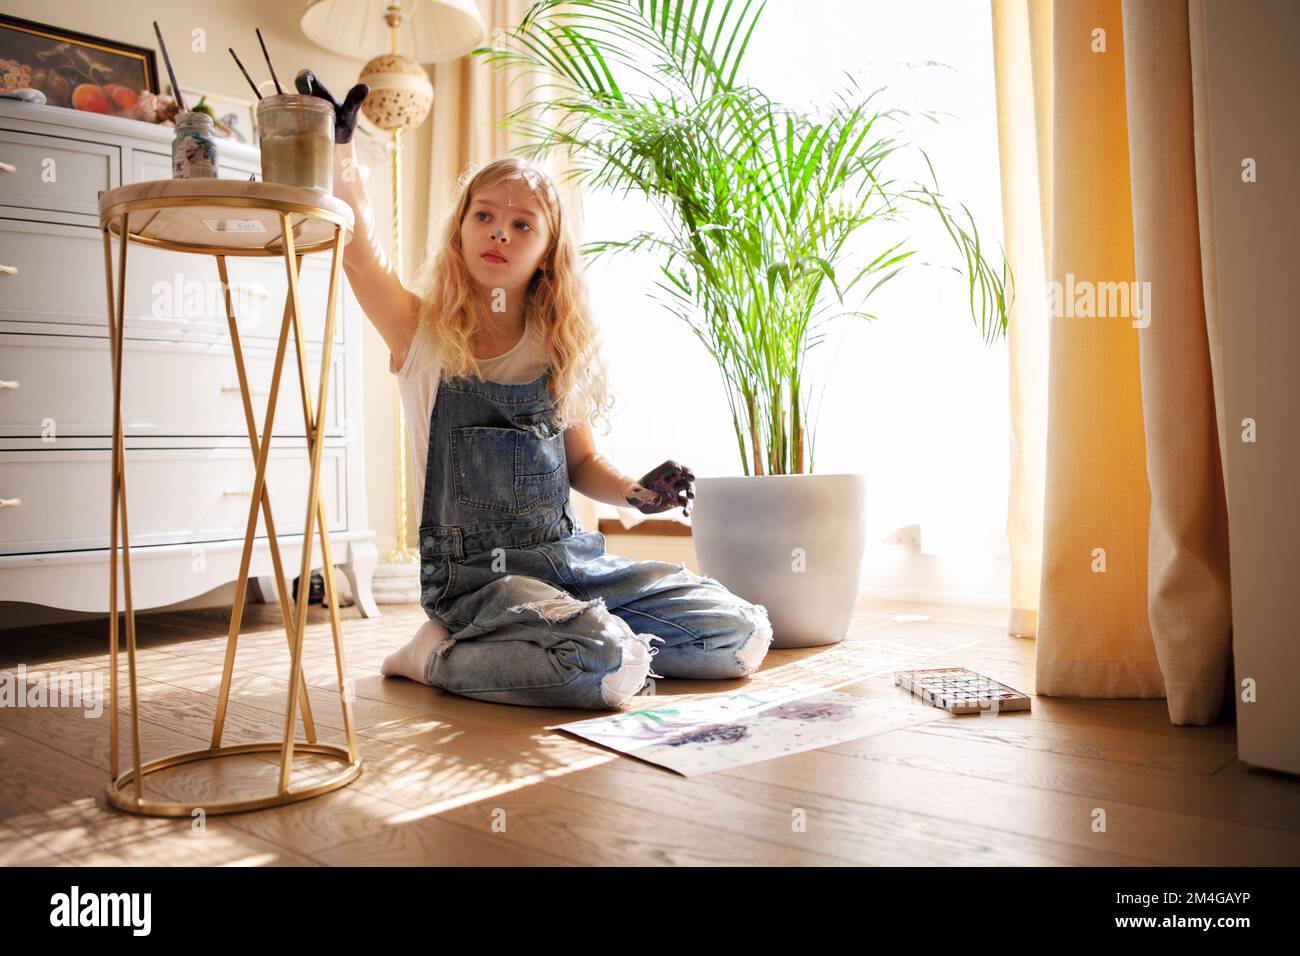 Child girl making drawings hands on paper sitting on floor. Young female artist painting with finger paints in sunny living room Stock Photo